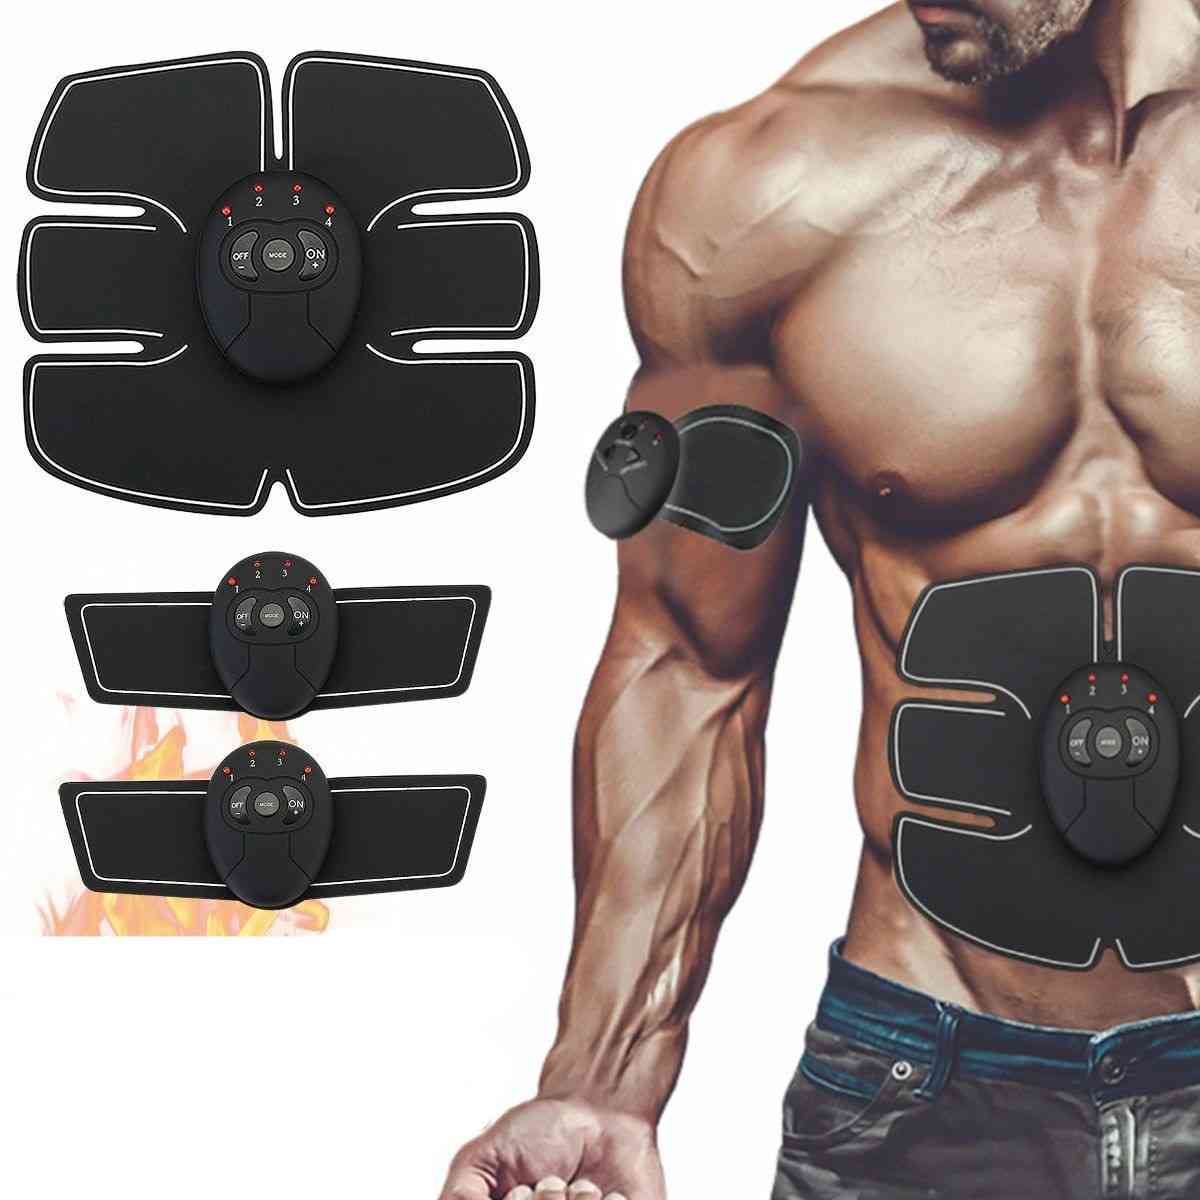 Ems Hip Muscle Stimulator Fitness Buttock Abdominal Trainer Sp